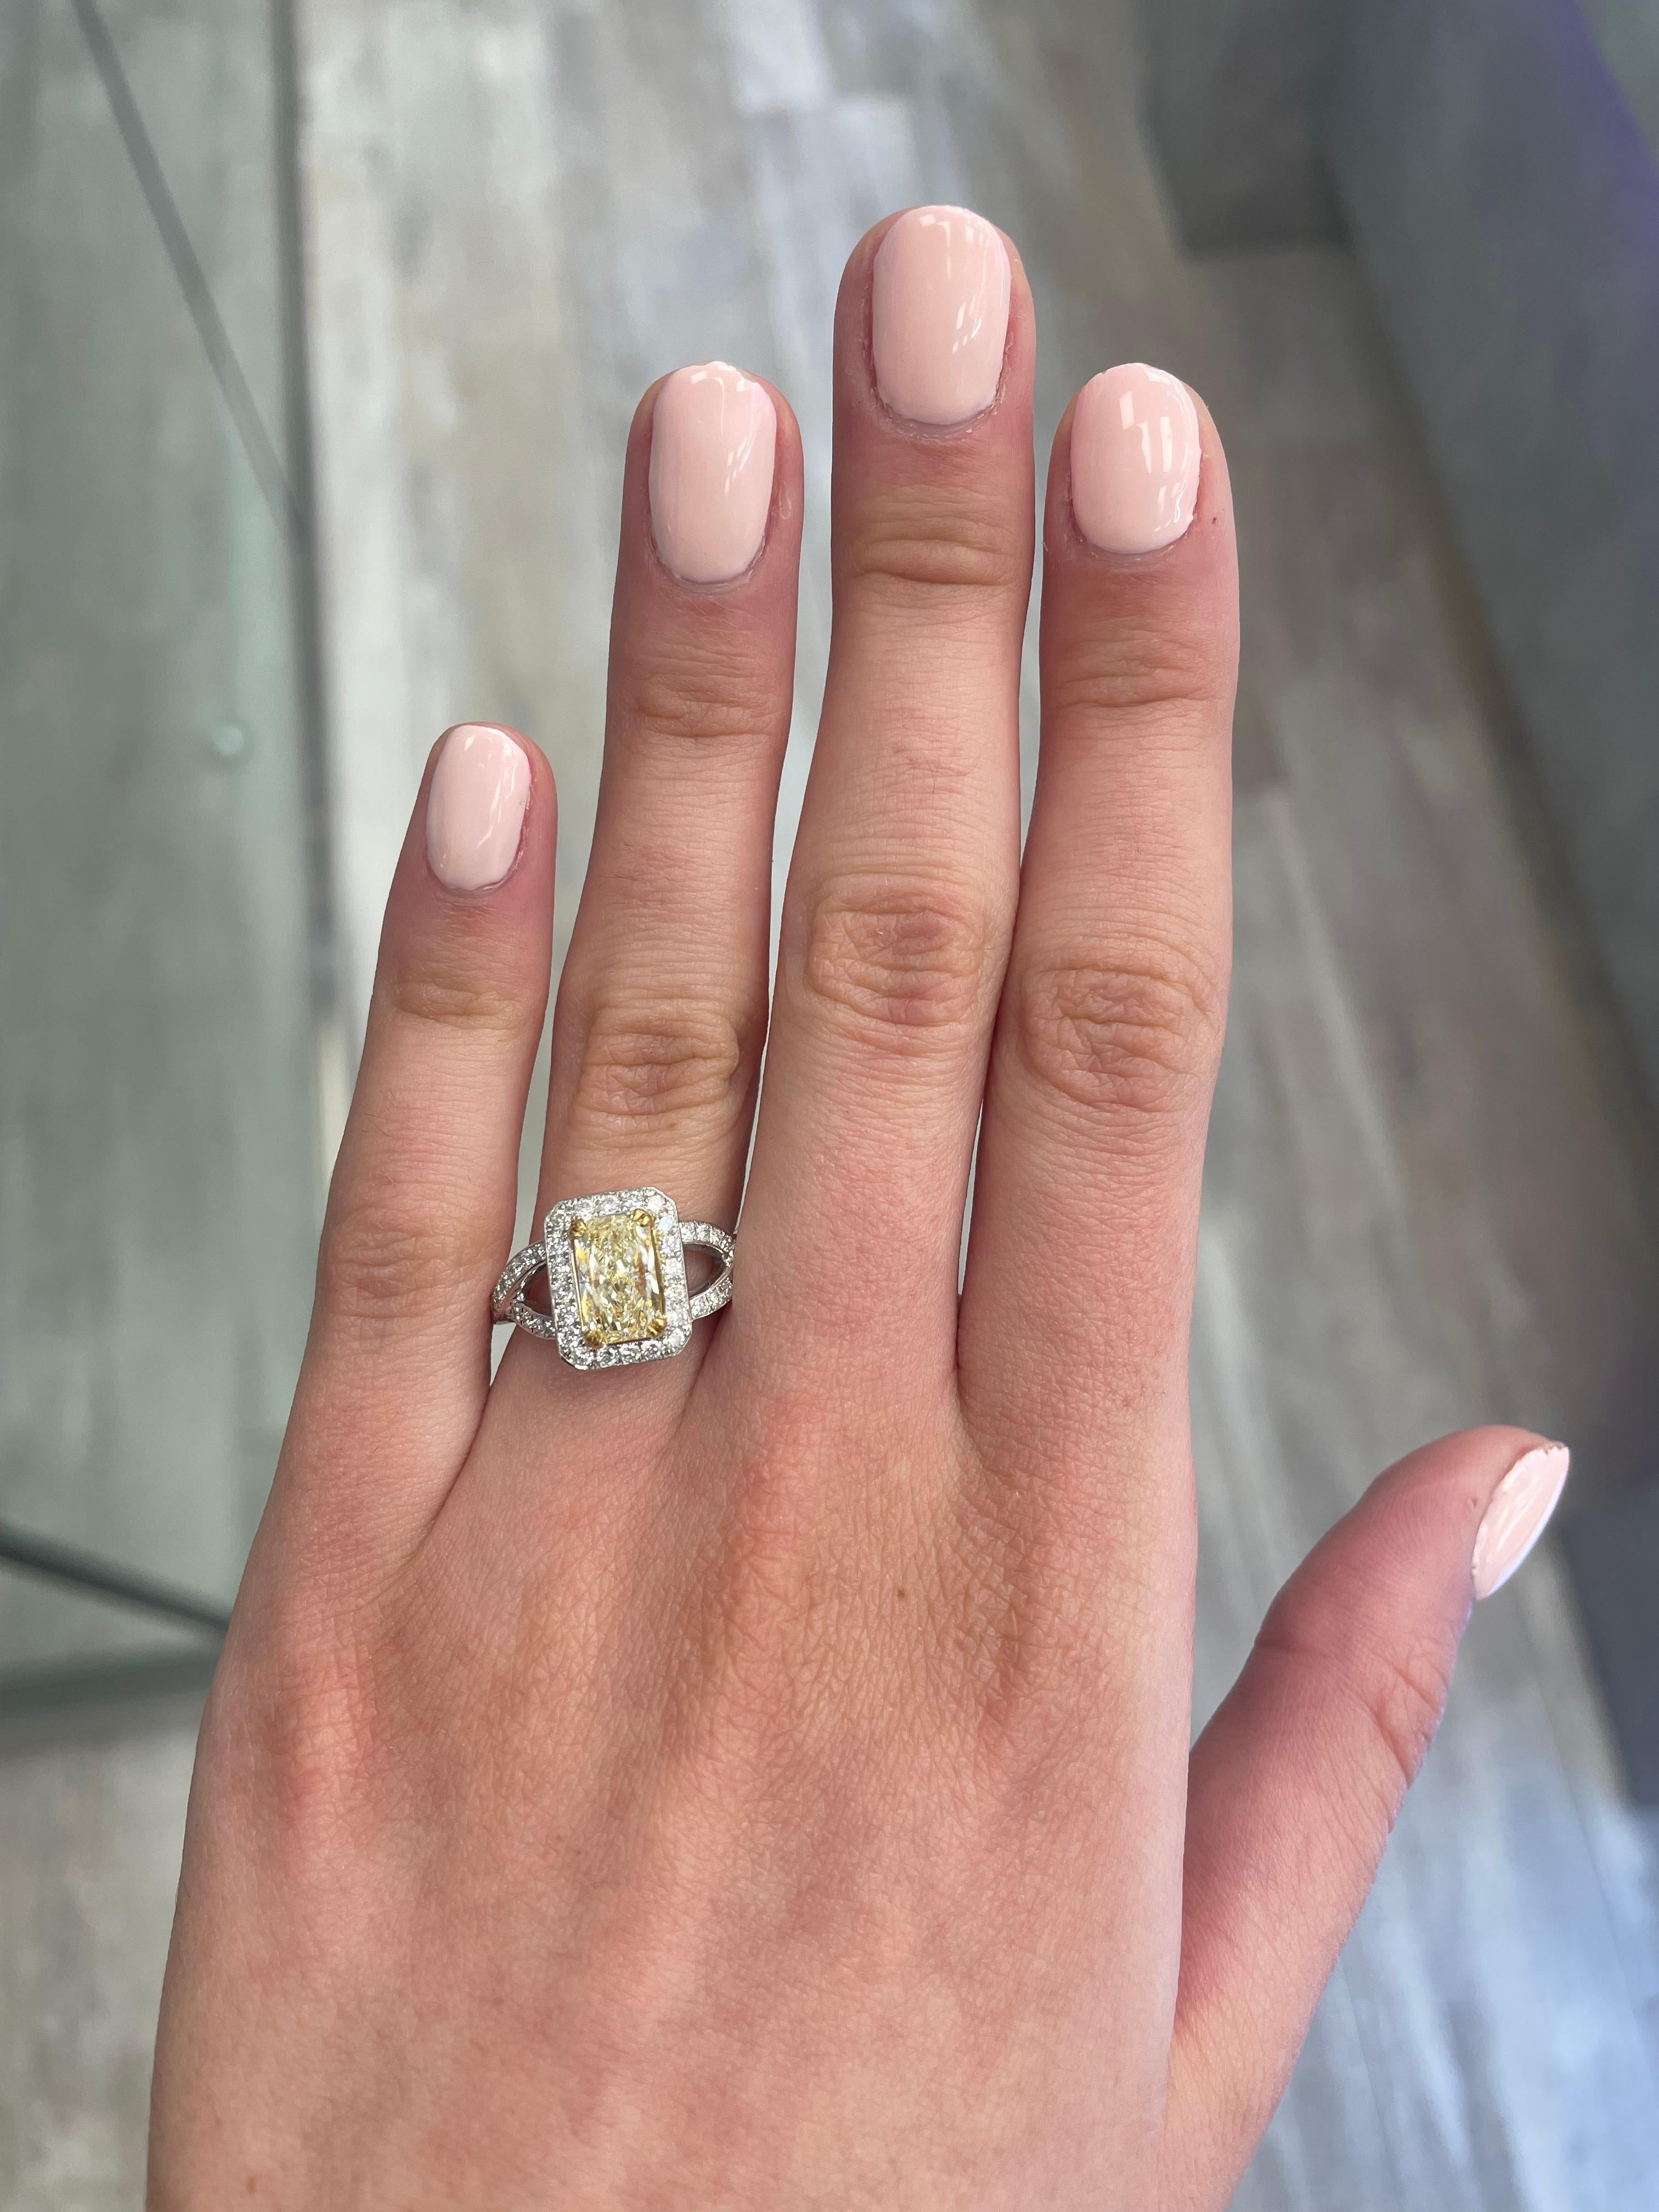 Stunning modern EGL certified yellow diamond with halo ring, two-tone 18k yellow and white gold, split shank. By Alexander Beverly Hills
2.30 carats total diamond weight.
1.55 carat radiant cut Fancy Yellow color and VS1 clarity diamond, EGL graded.